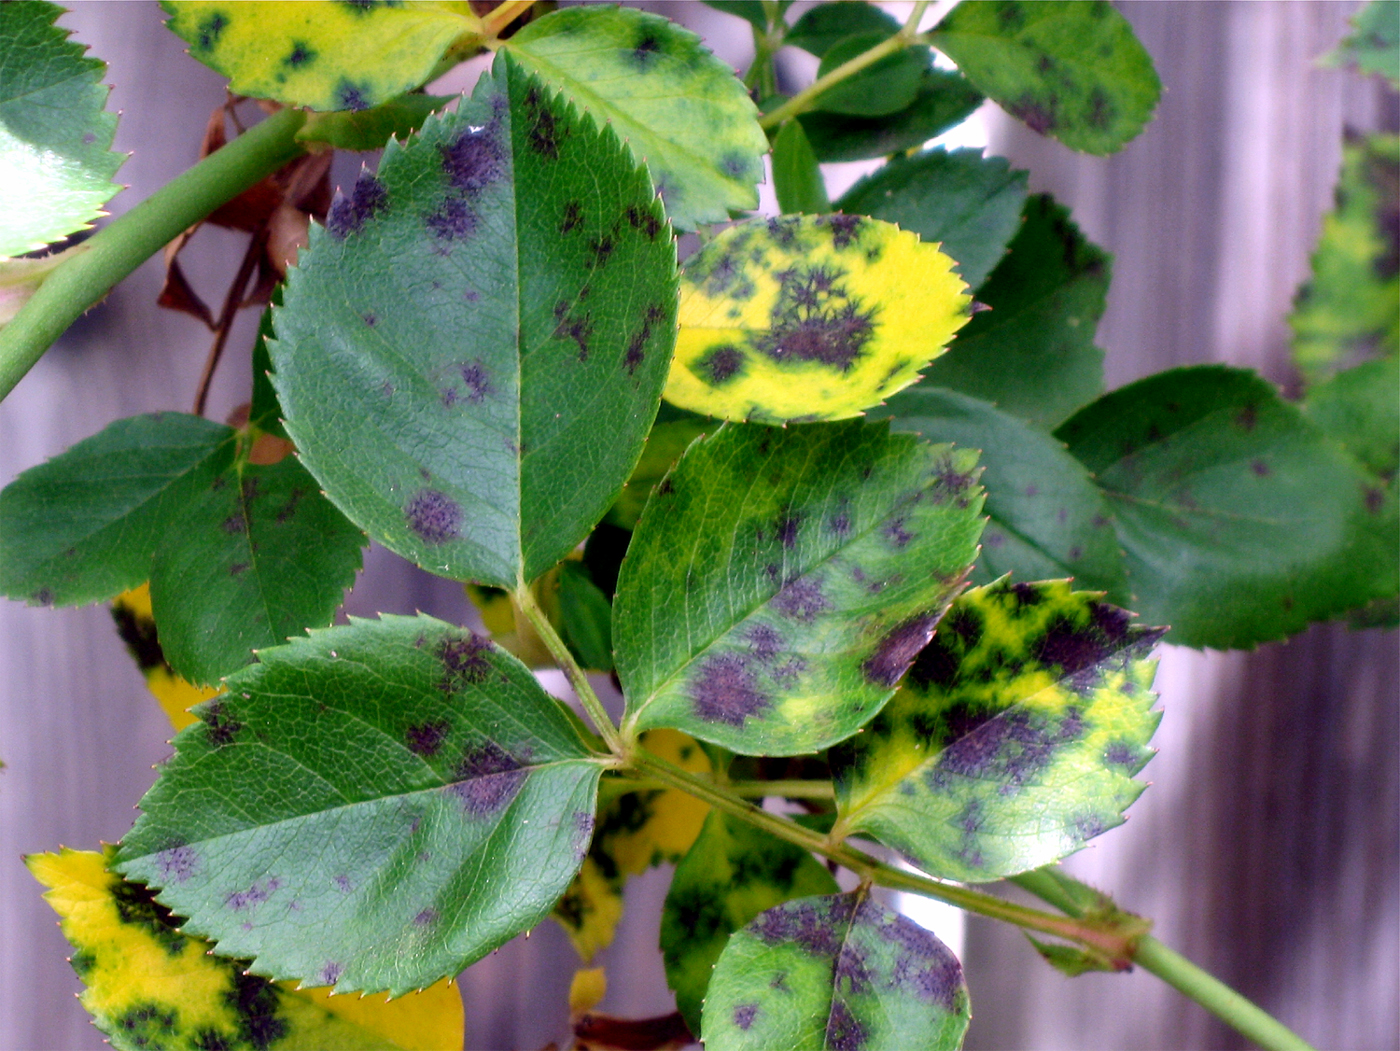 How to control Black spot on the rose leaves | How to use an organic ...